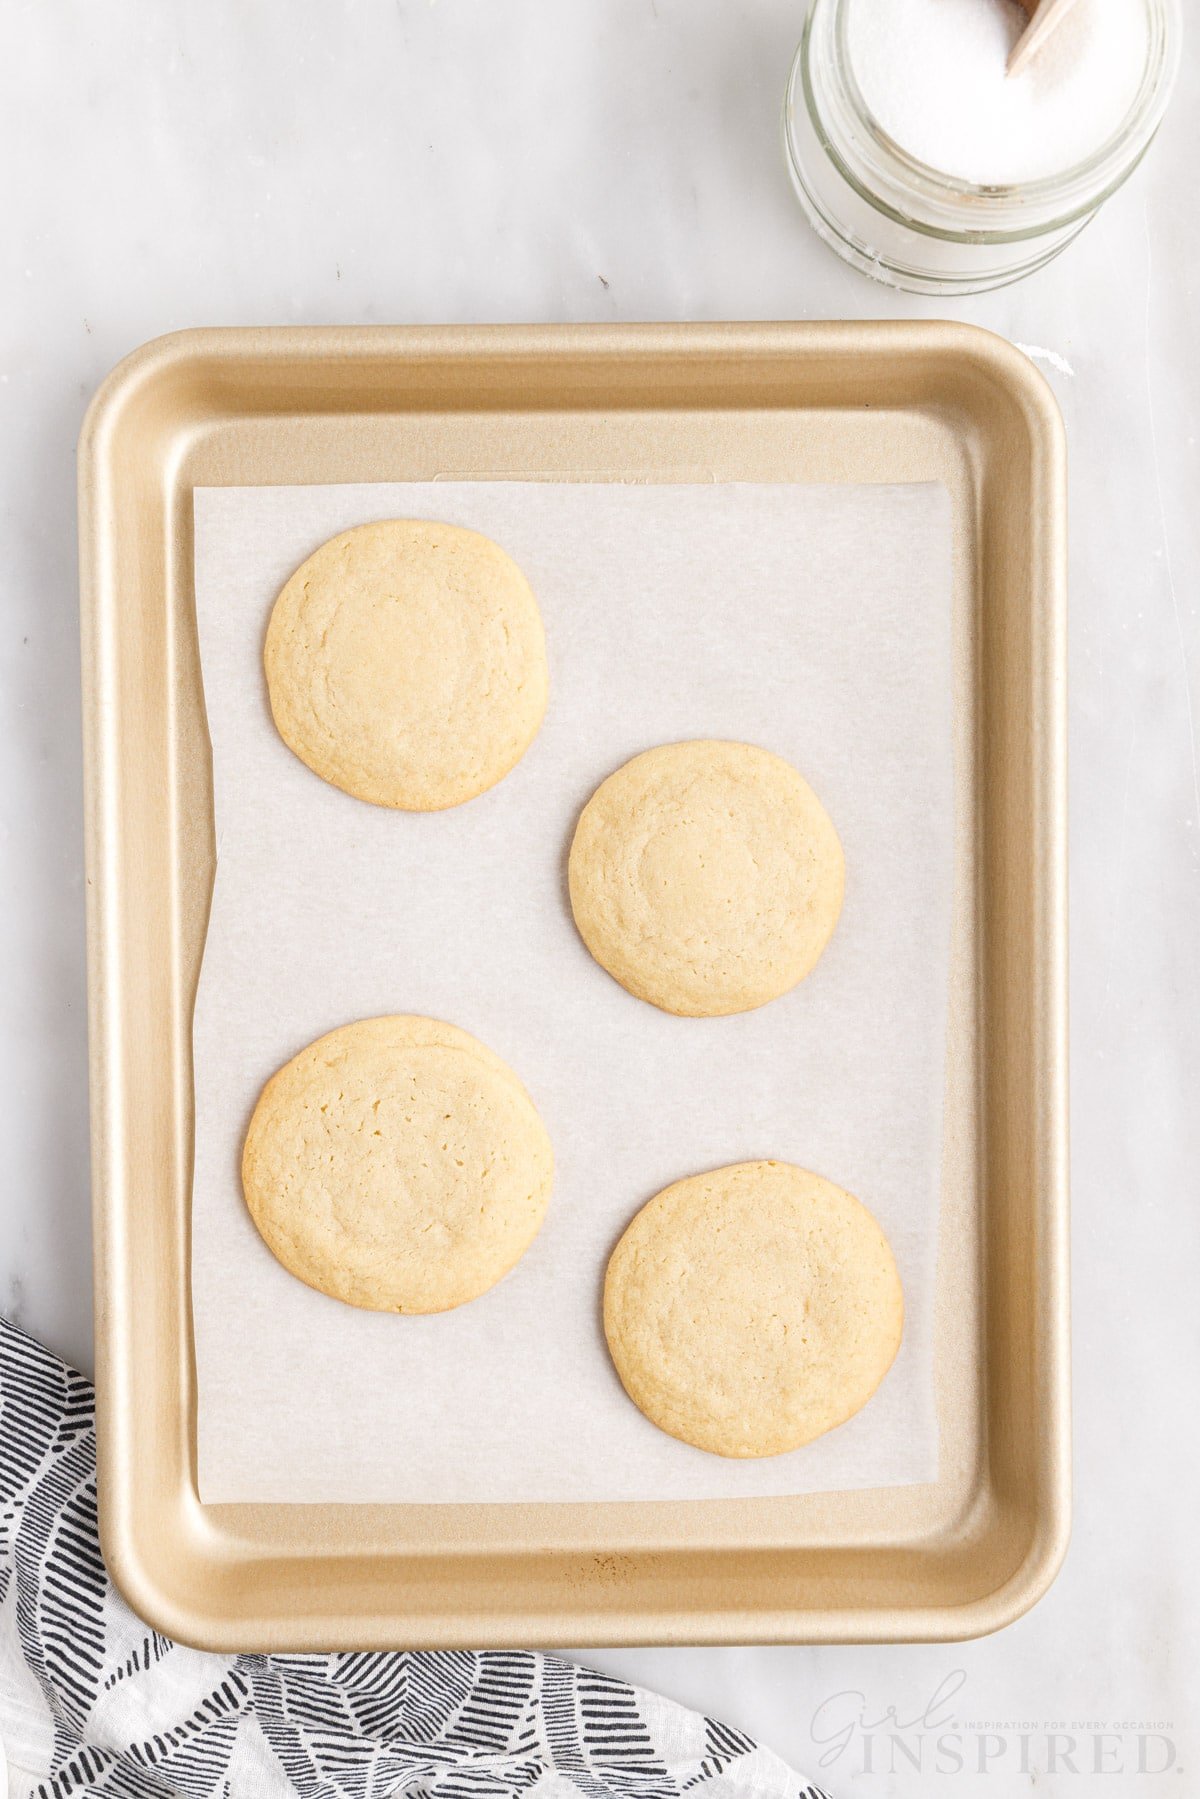 four soft baked sugar cookies on the baking sheet